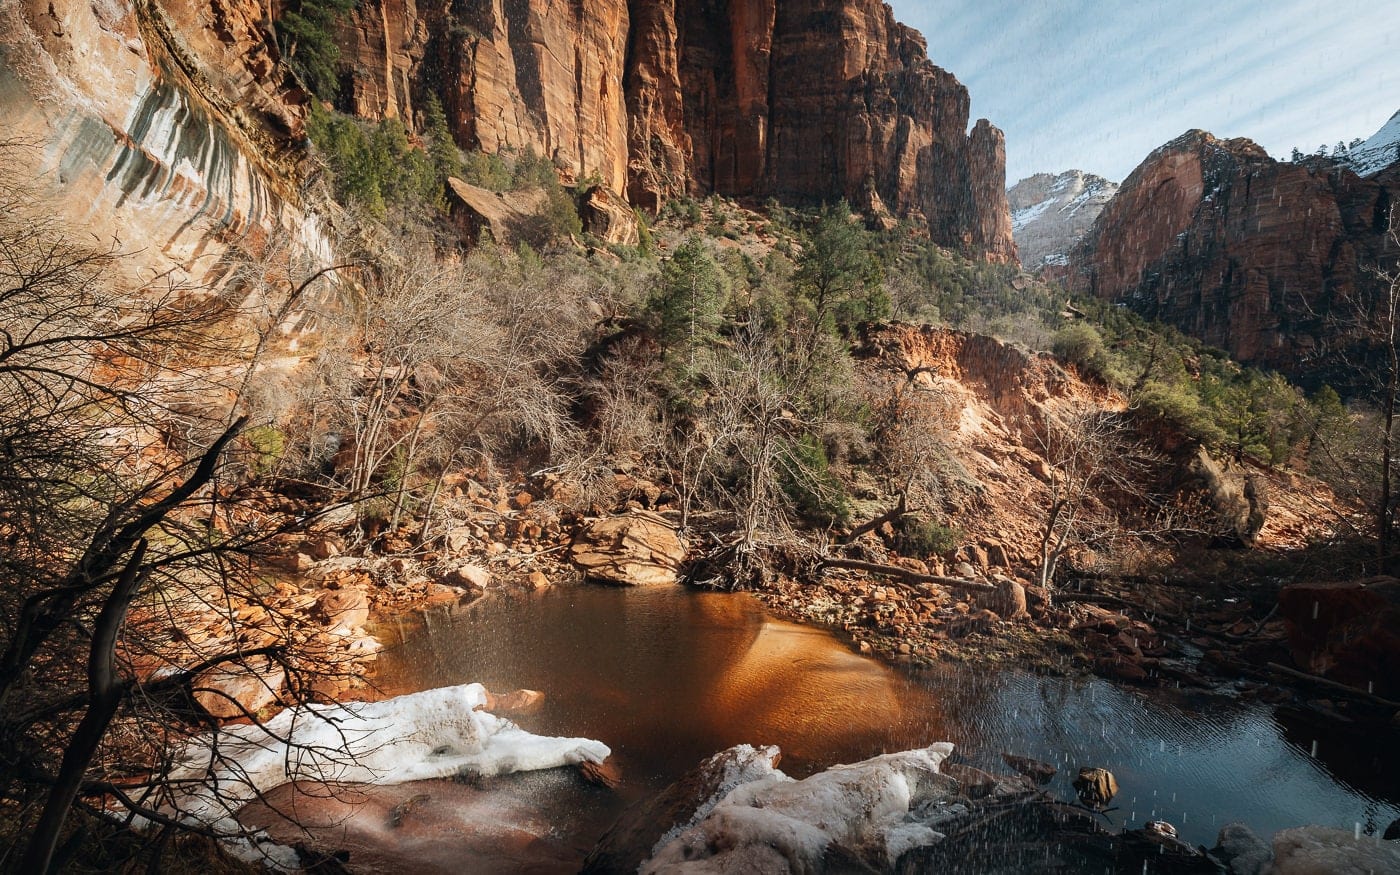 Lower Emerald Pools Trail in Zion National Park, Utah